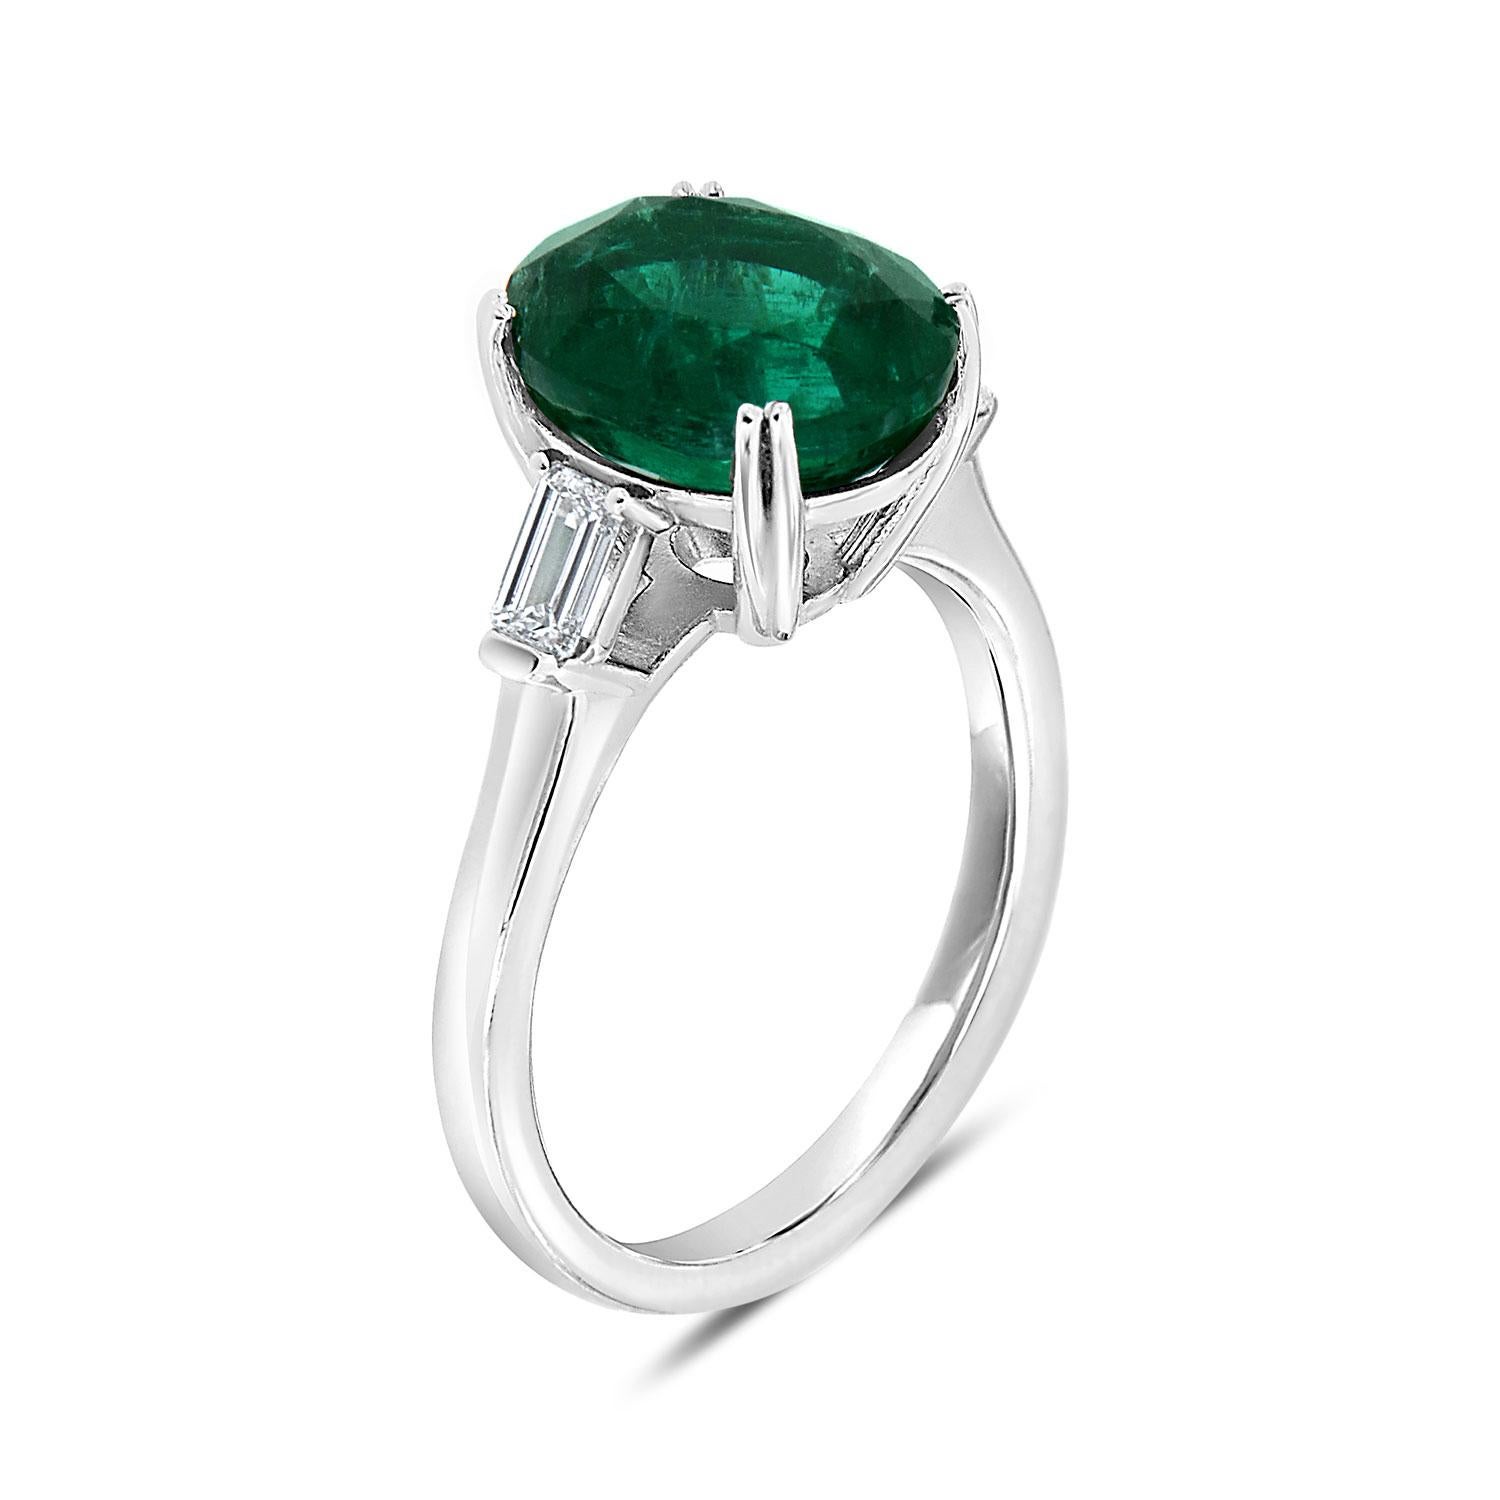 This timeless design Three-Stone ring features a 4.27 Carat Oval-Shape vibrant green Natural Emerald from Zambia flanked by two Emerald shaped natural diamonds in weight of 0.38 Carat on a 2.4 mm band. The Emerald exhibit an exceptional luster. You